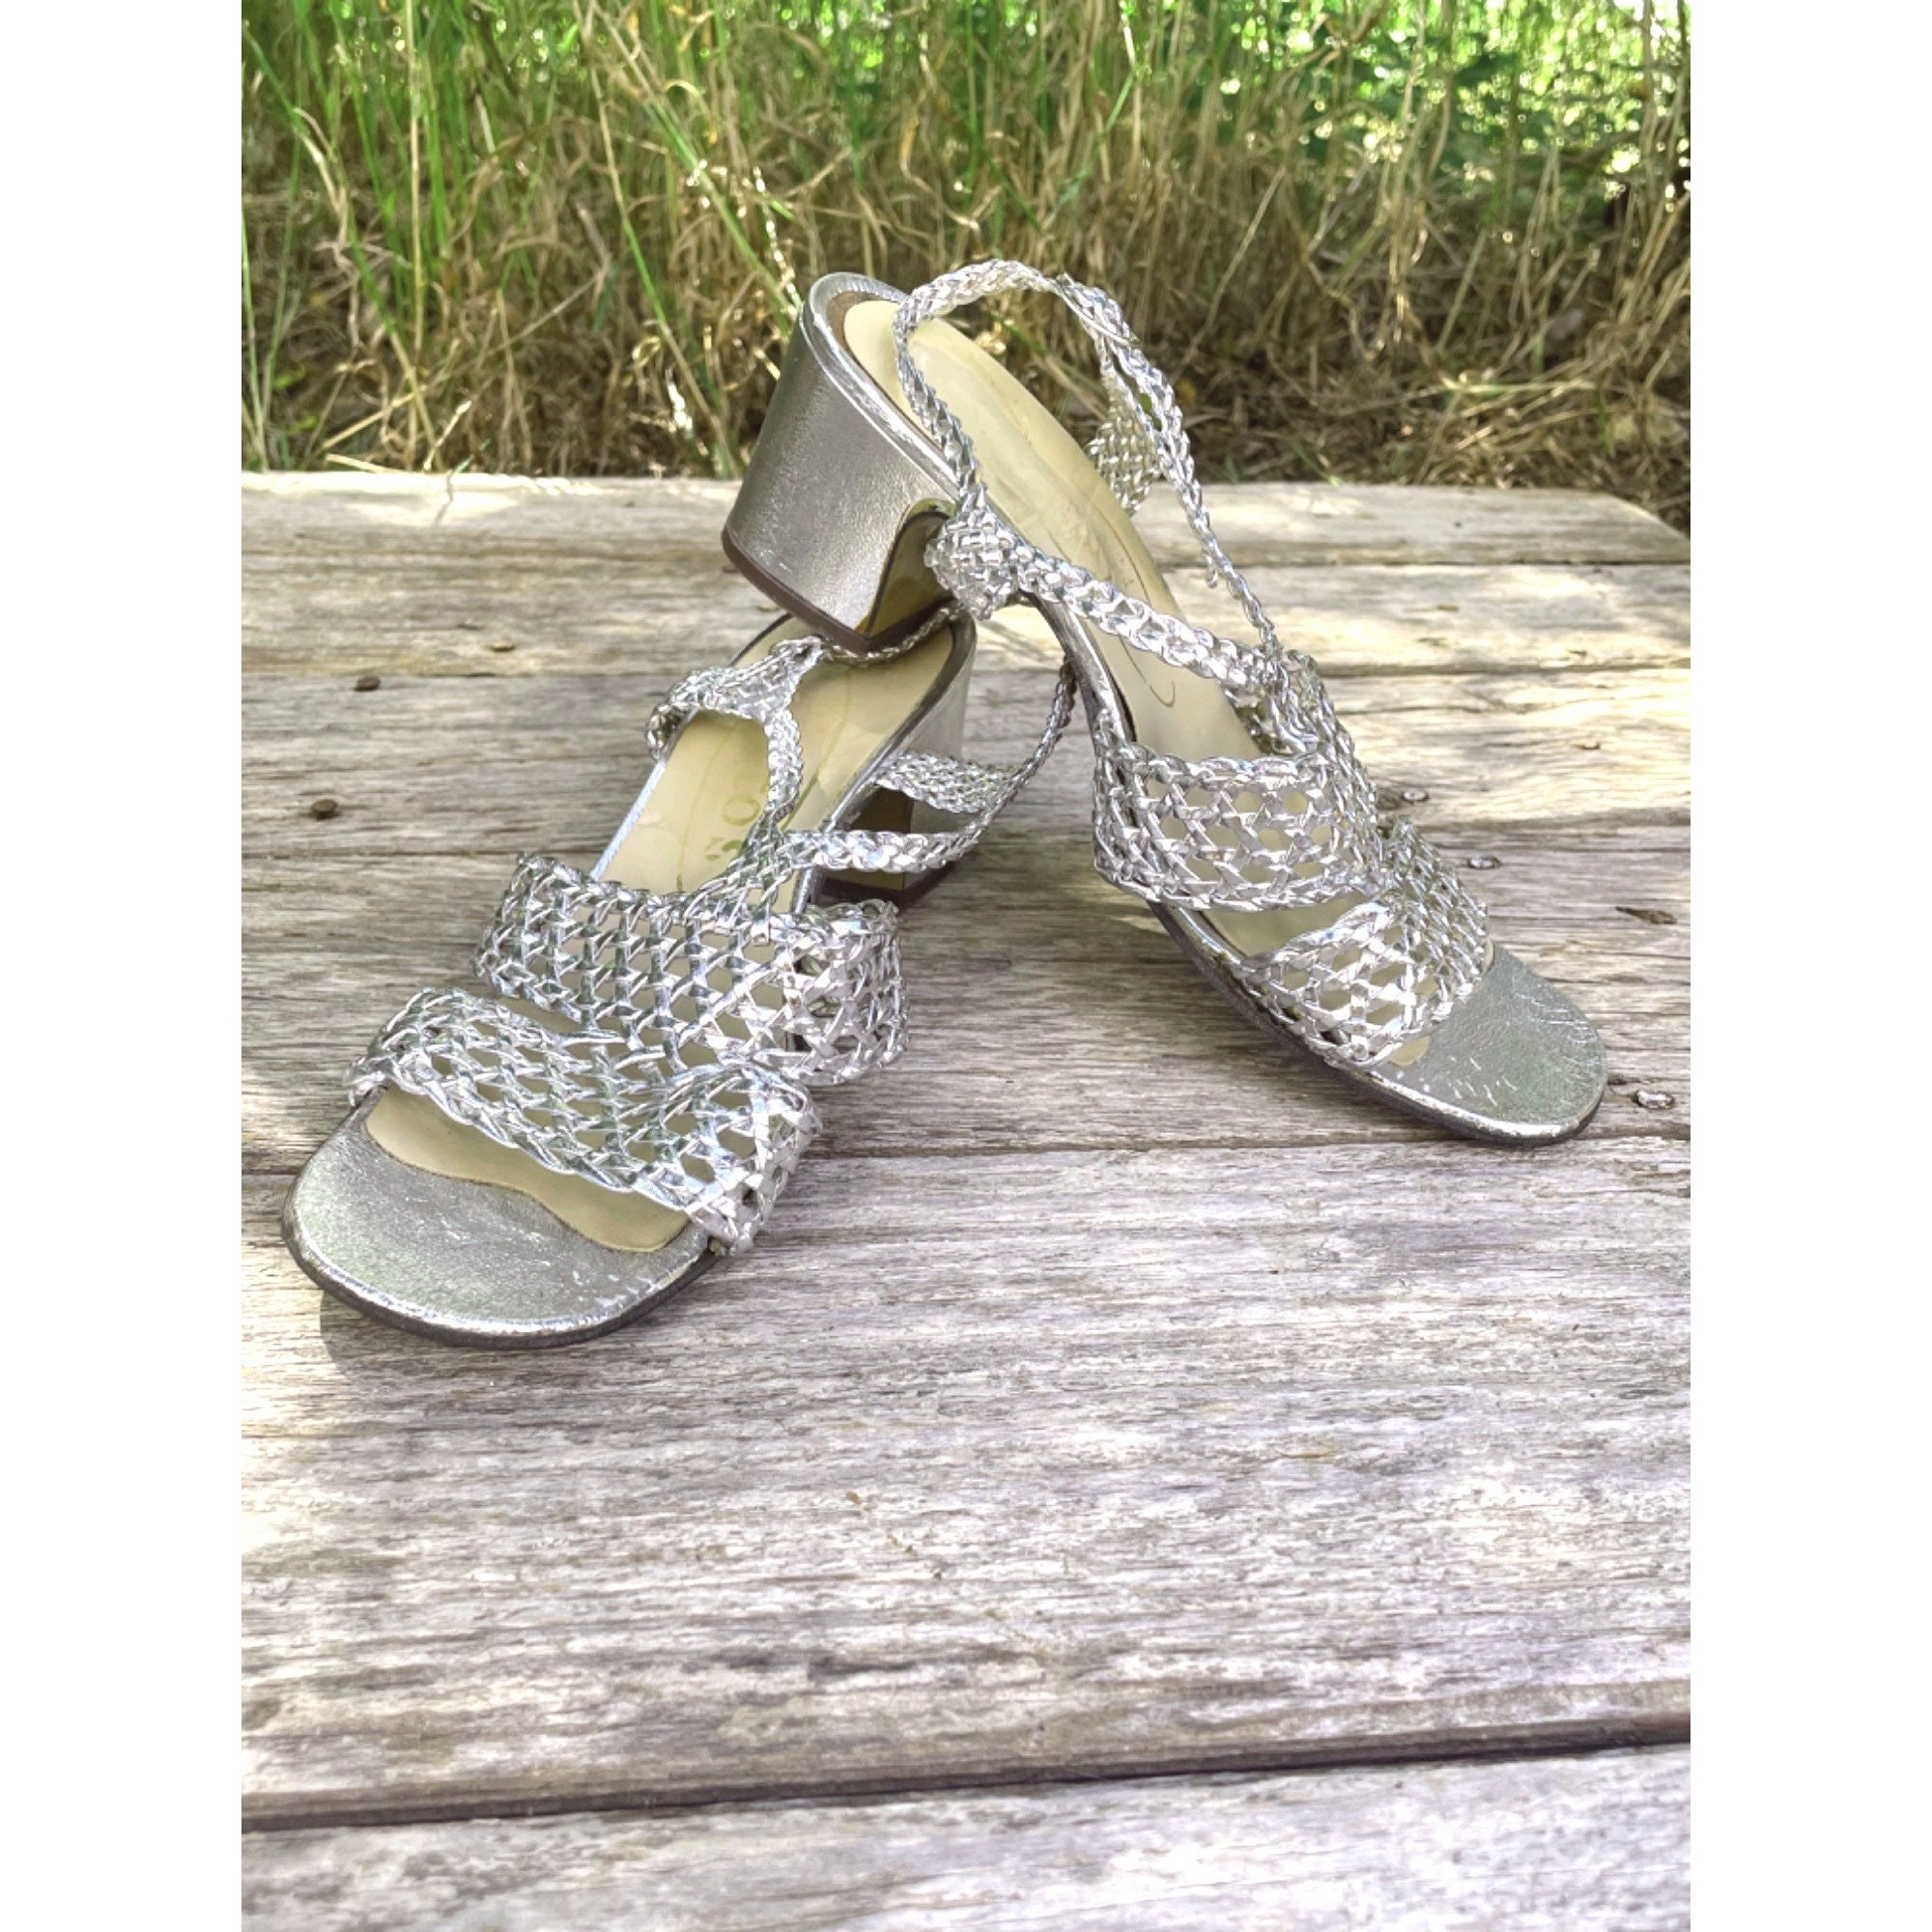 Vintage 60s Signals metallic gold sandals with faux stone embellishmen –  Hey Tiger